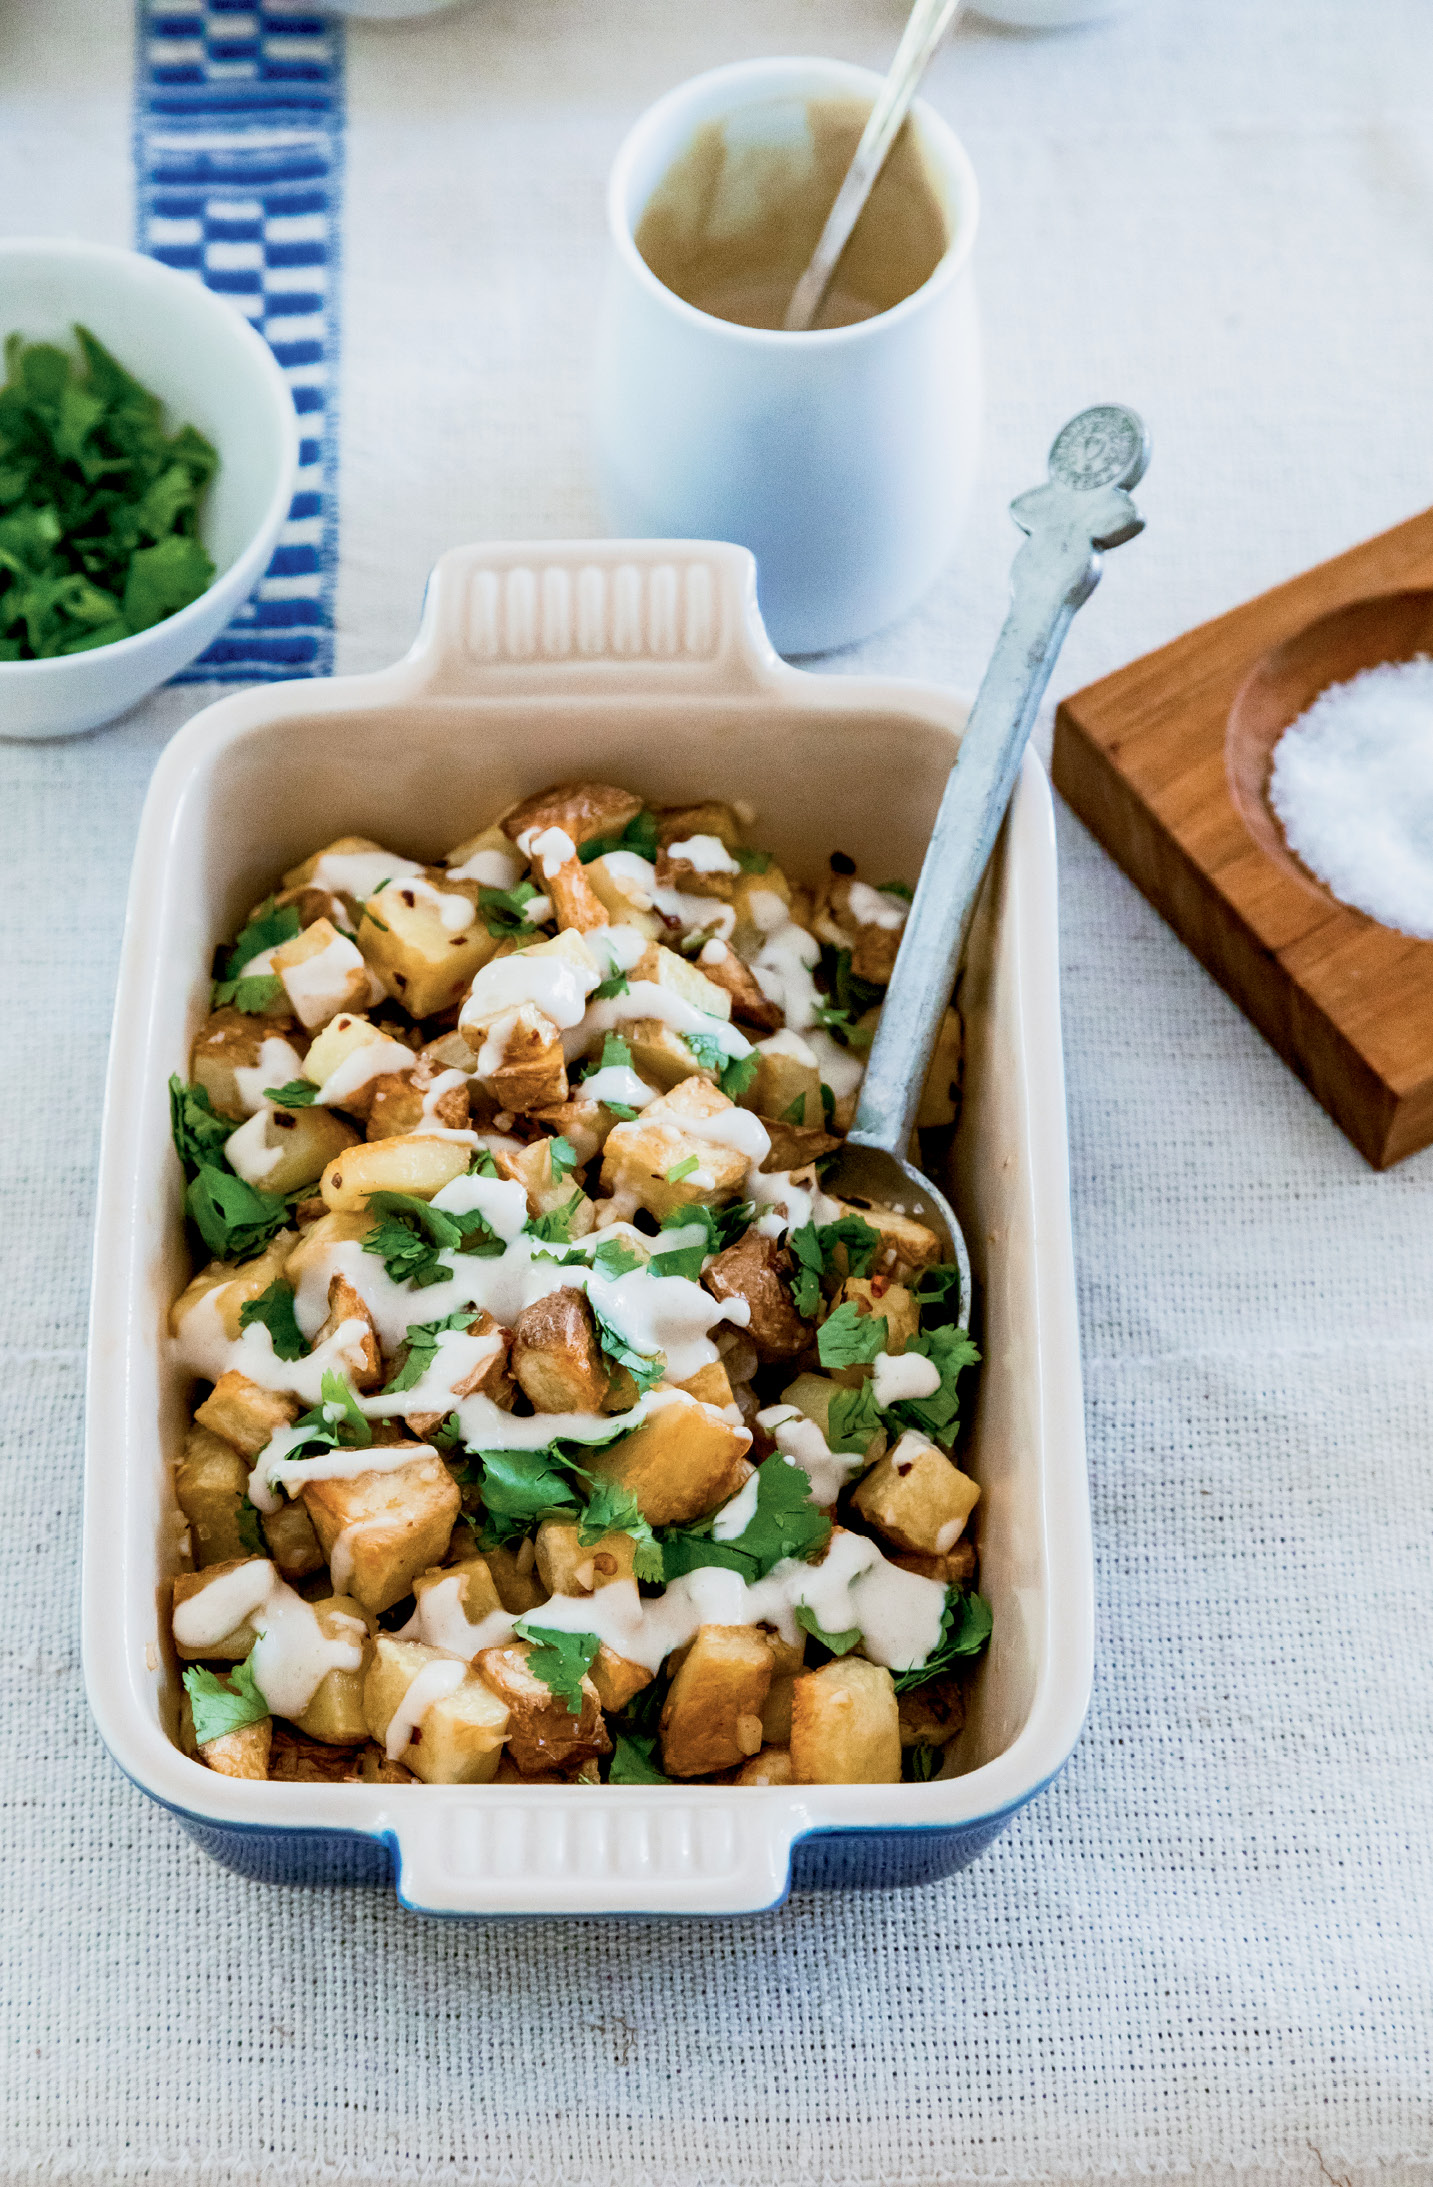 For her batata harra (Lebanese spicy potatoes), Jessica offers a not-fried method that’s big on flavor, including garlic, lemon juice, red pepper, and cilantro.